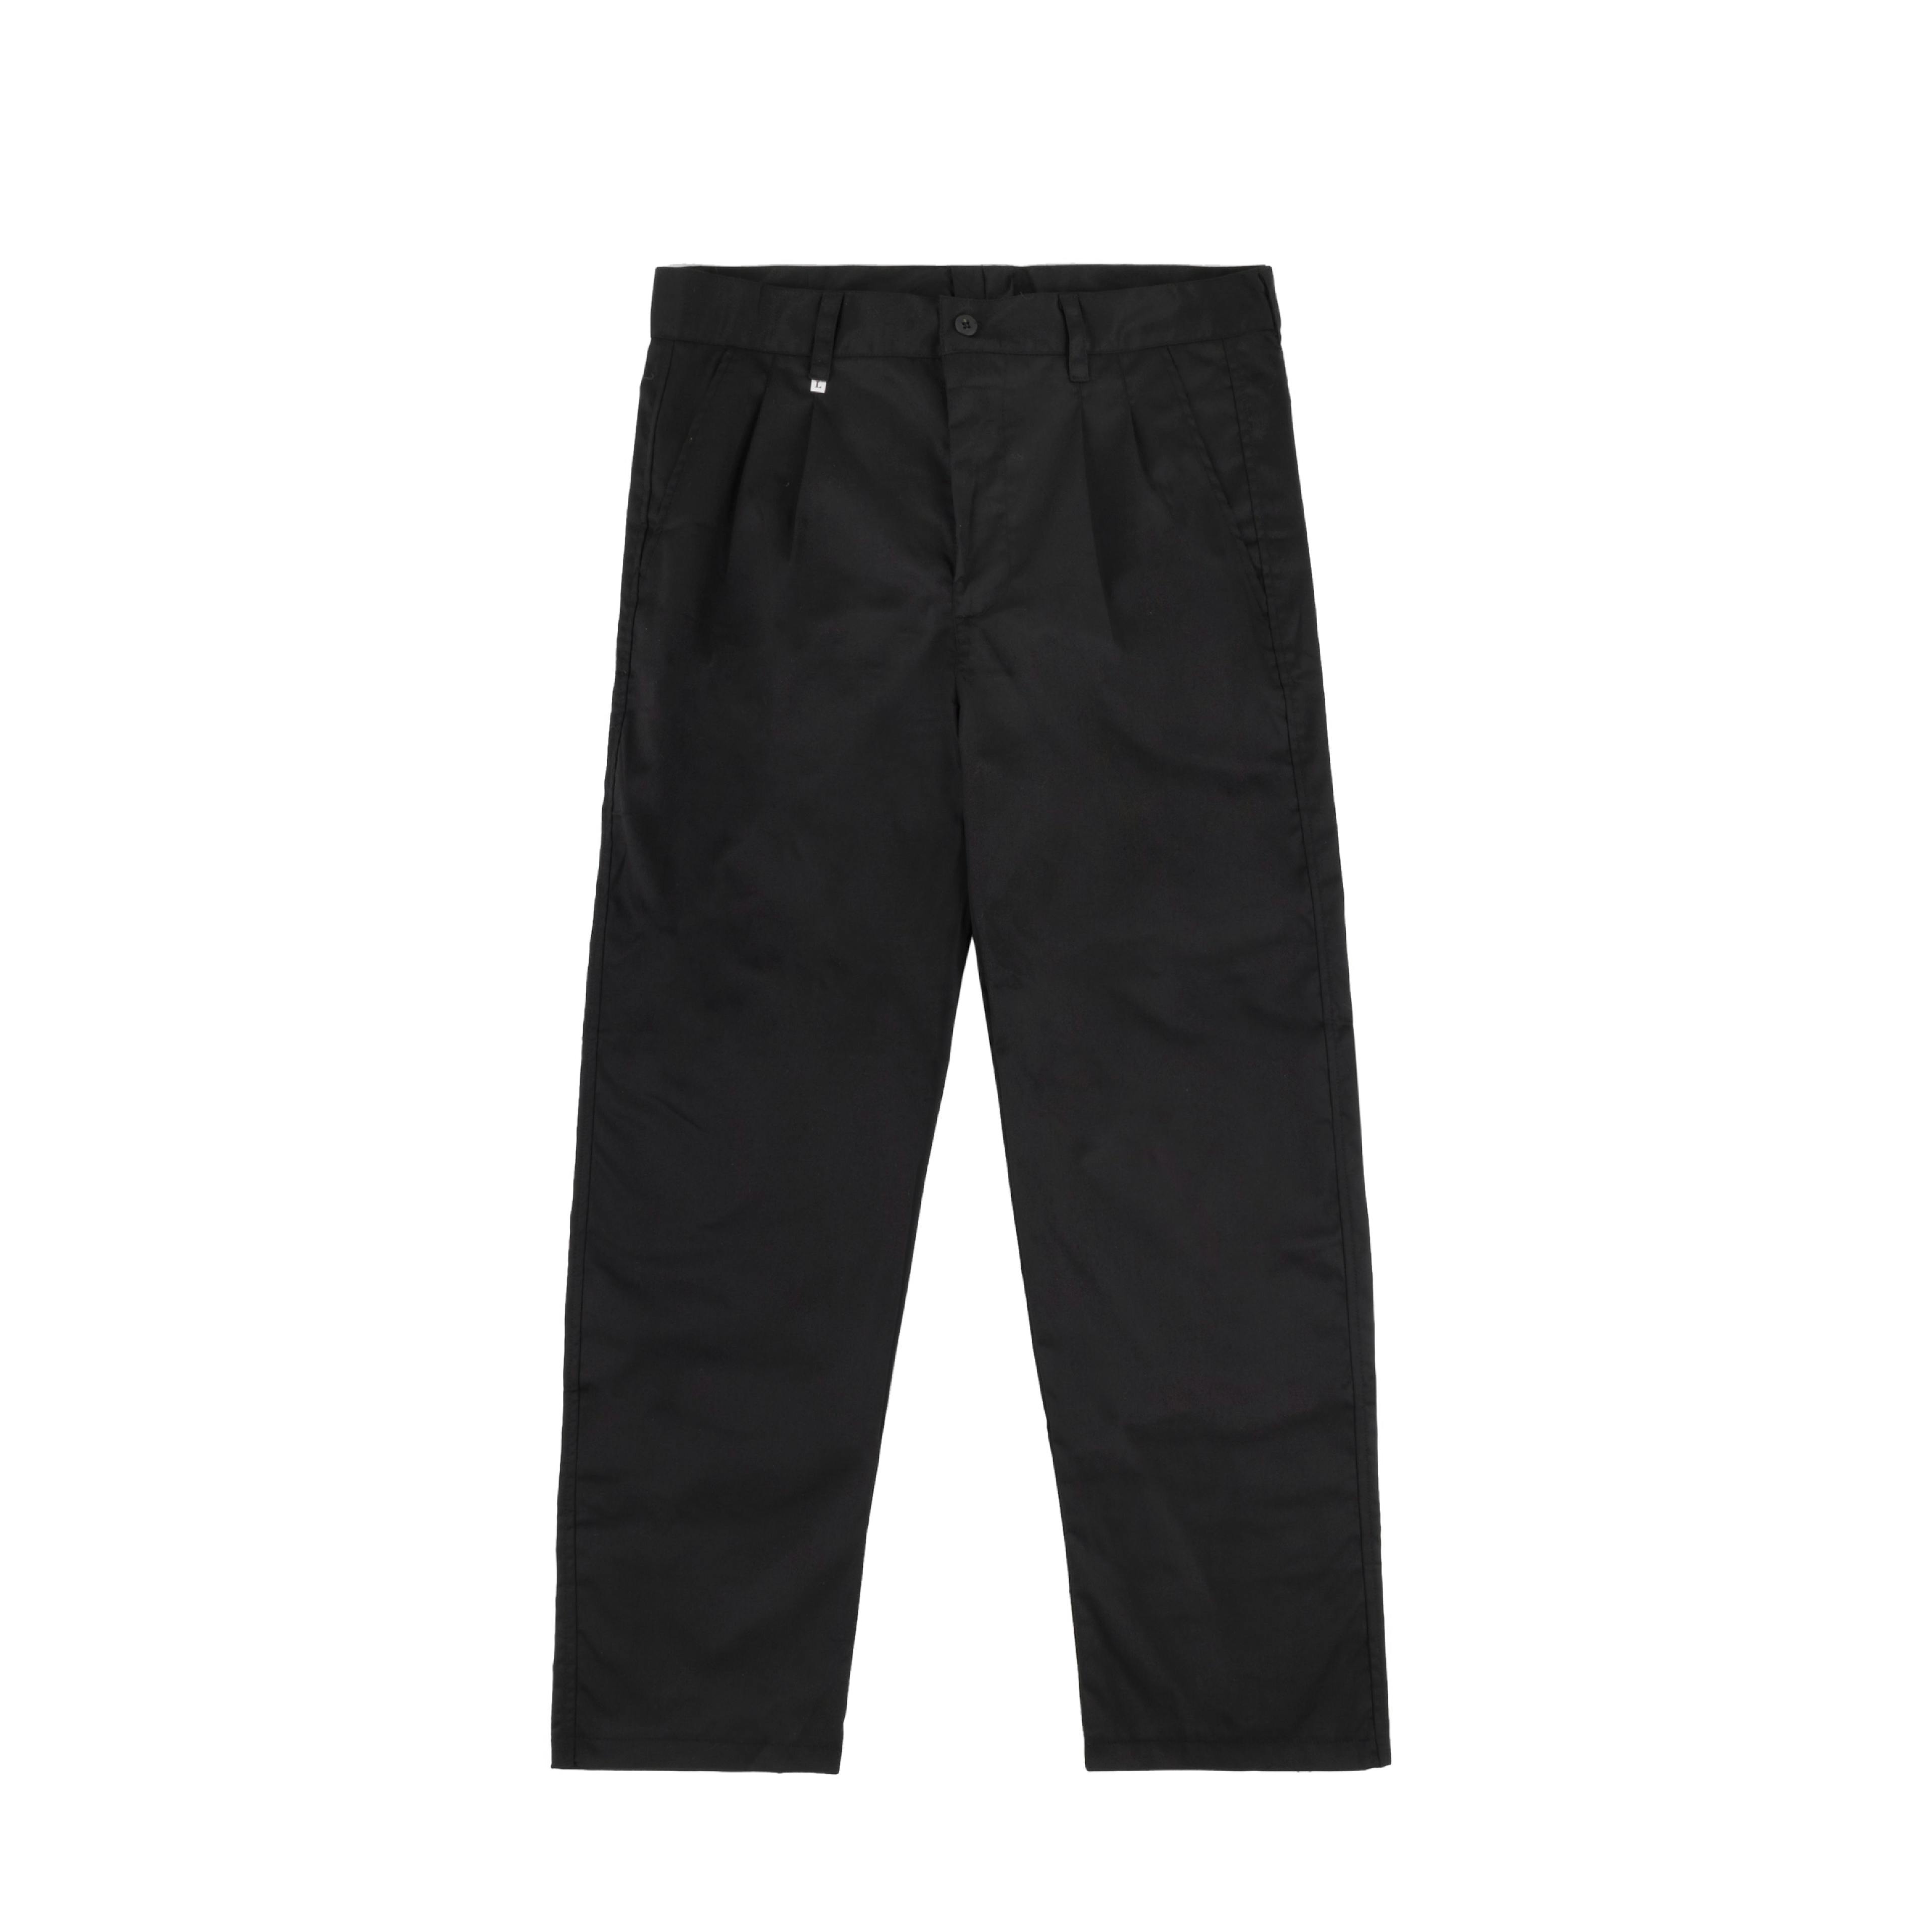 a black work pant = 1 of 5